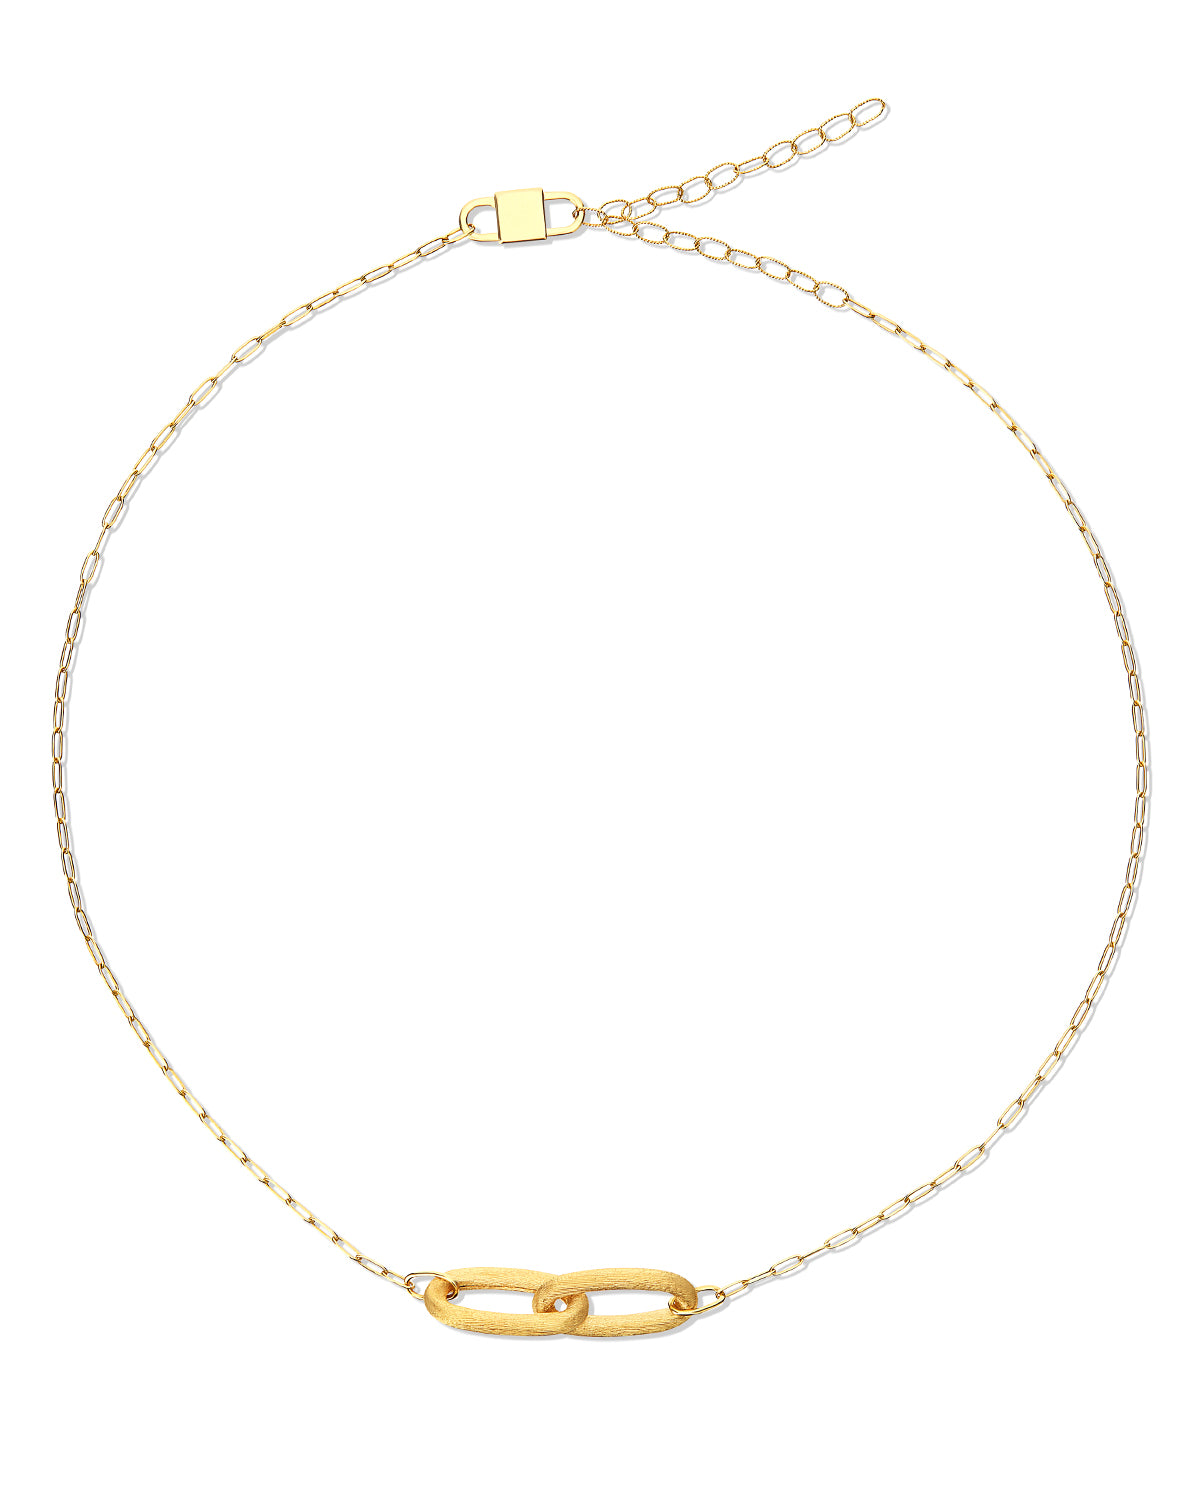 LIBERA GOLD double ring necklace